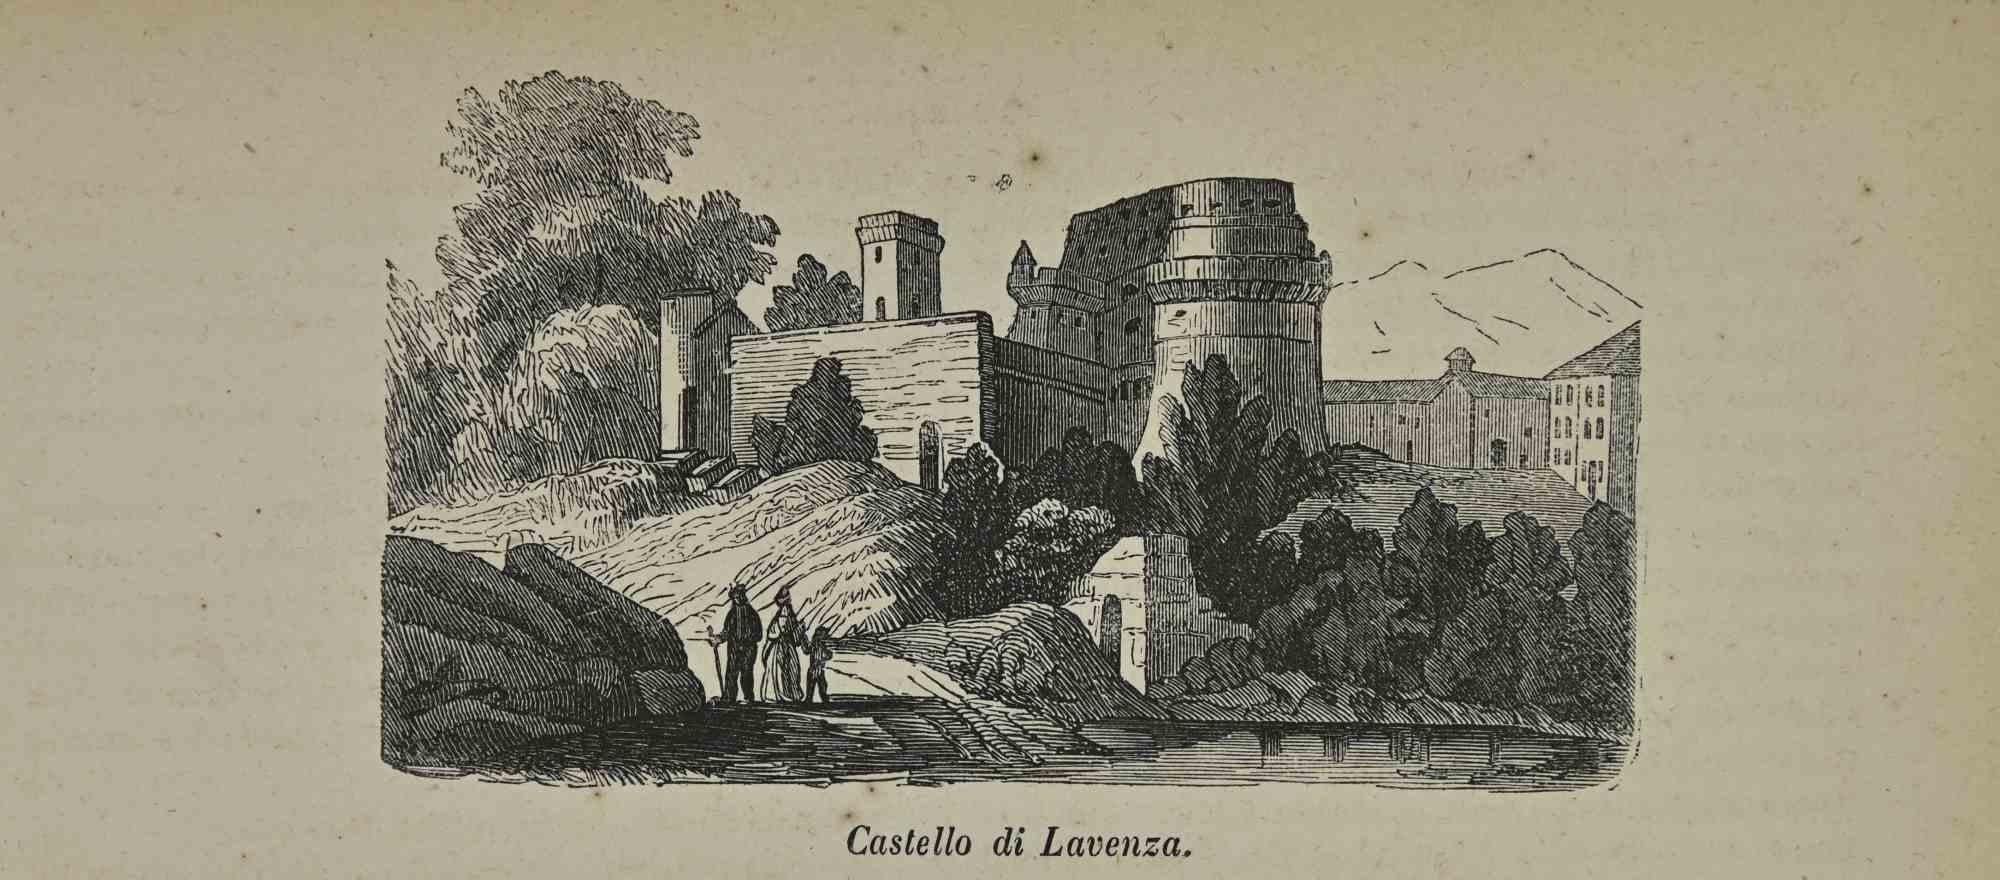 Various Artists Landscape Print - Uses and Customs - Castel of Lavenza - Lithograph - 1862